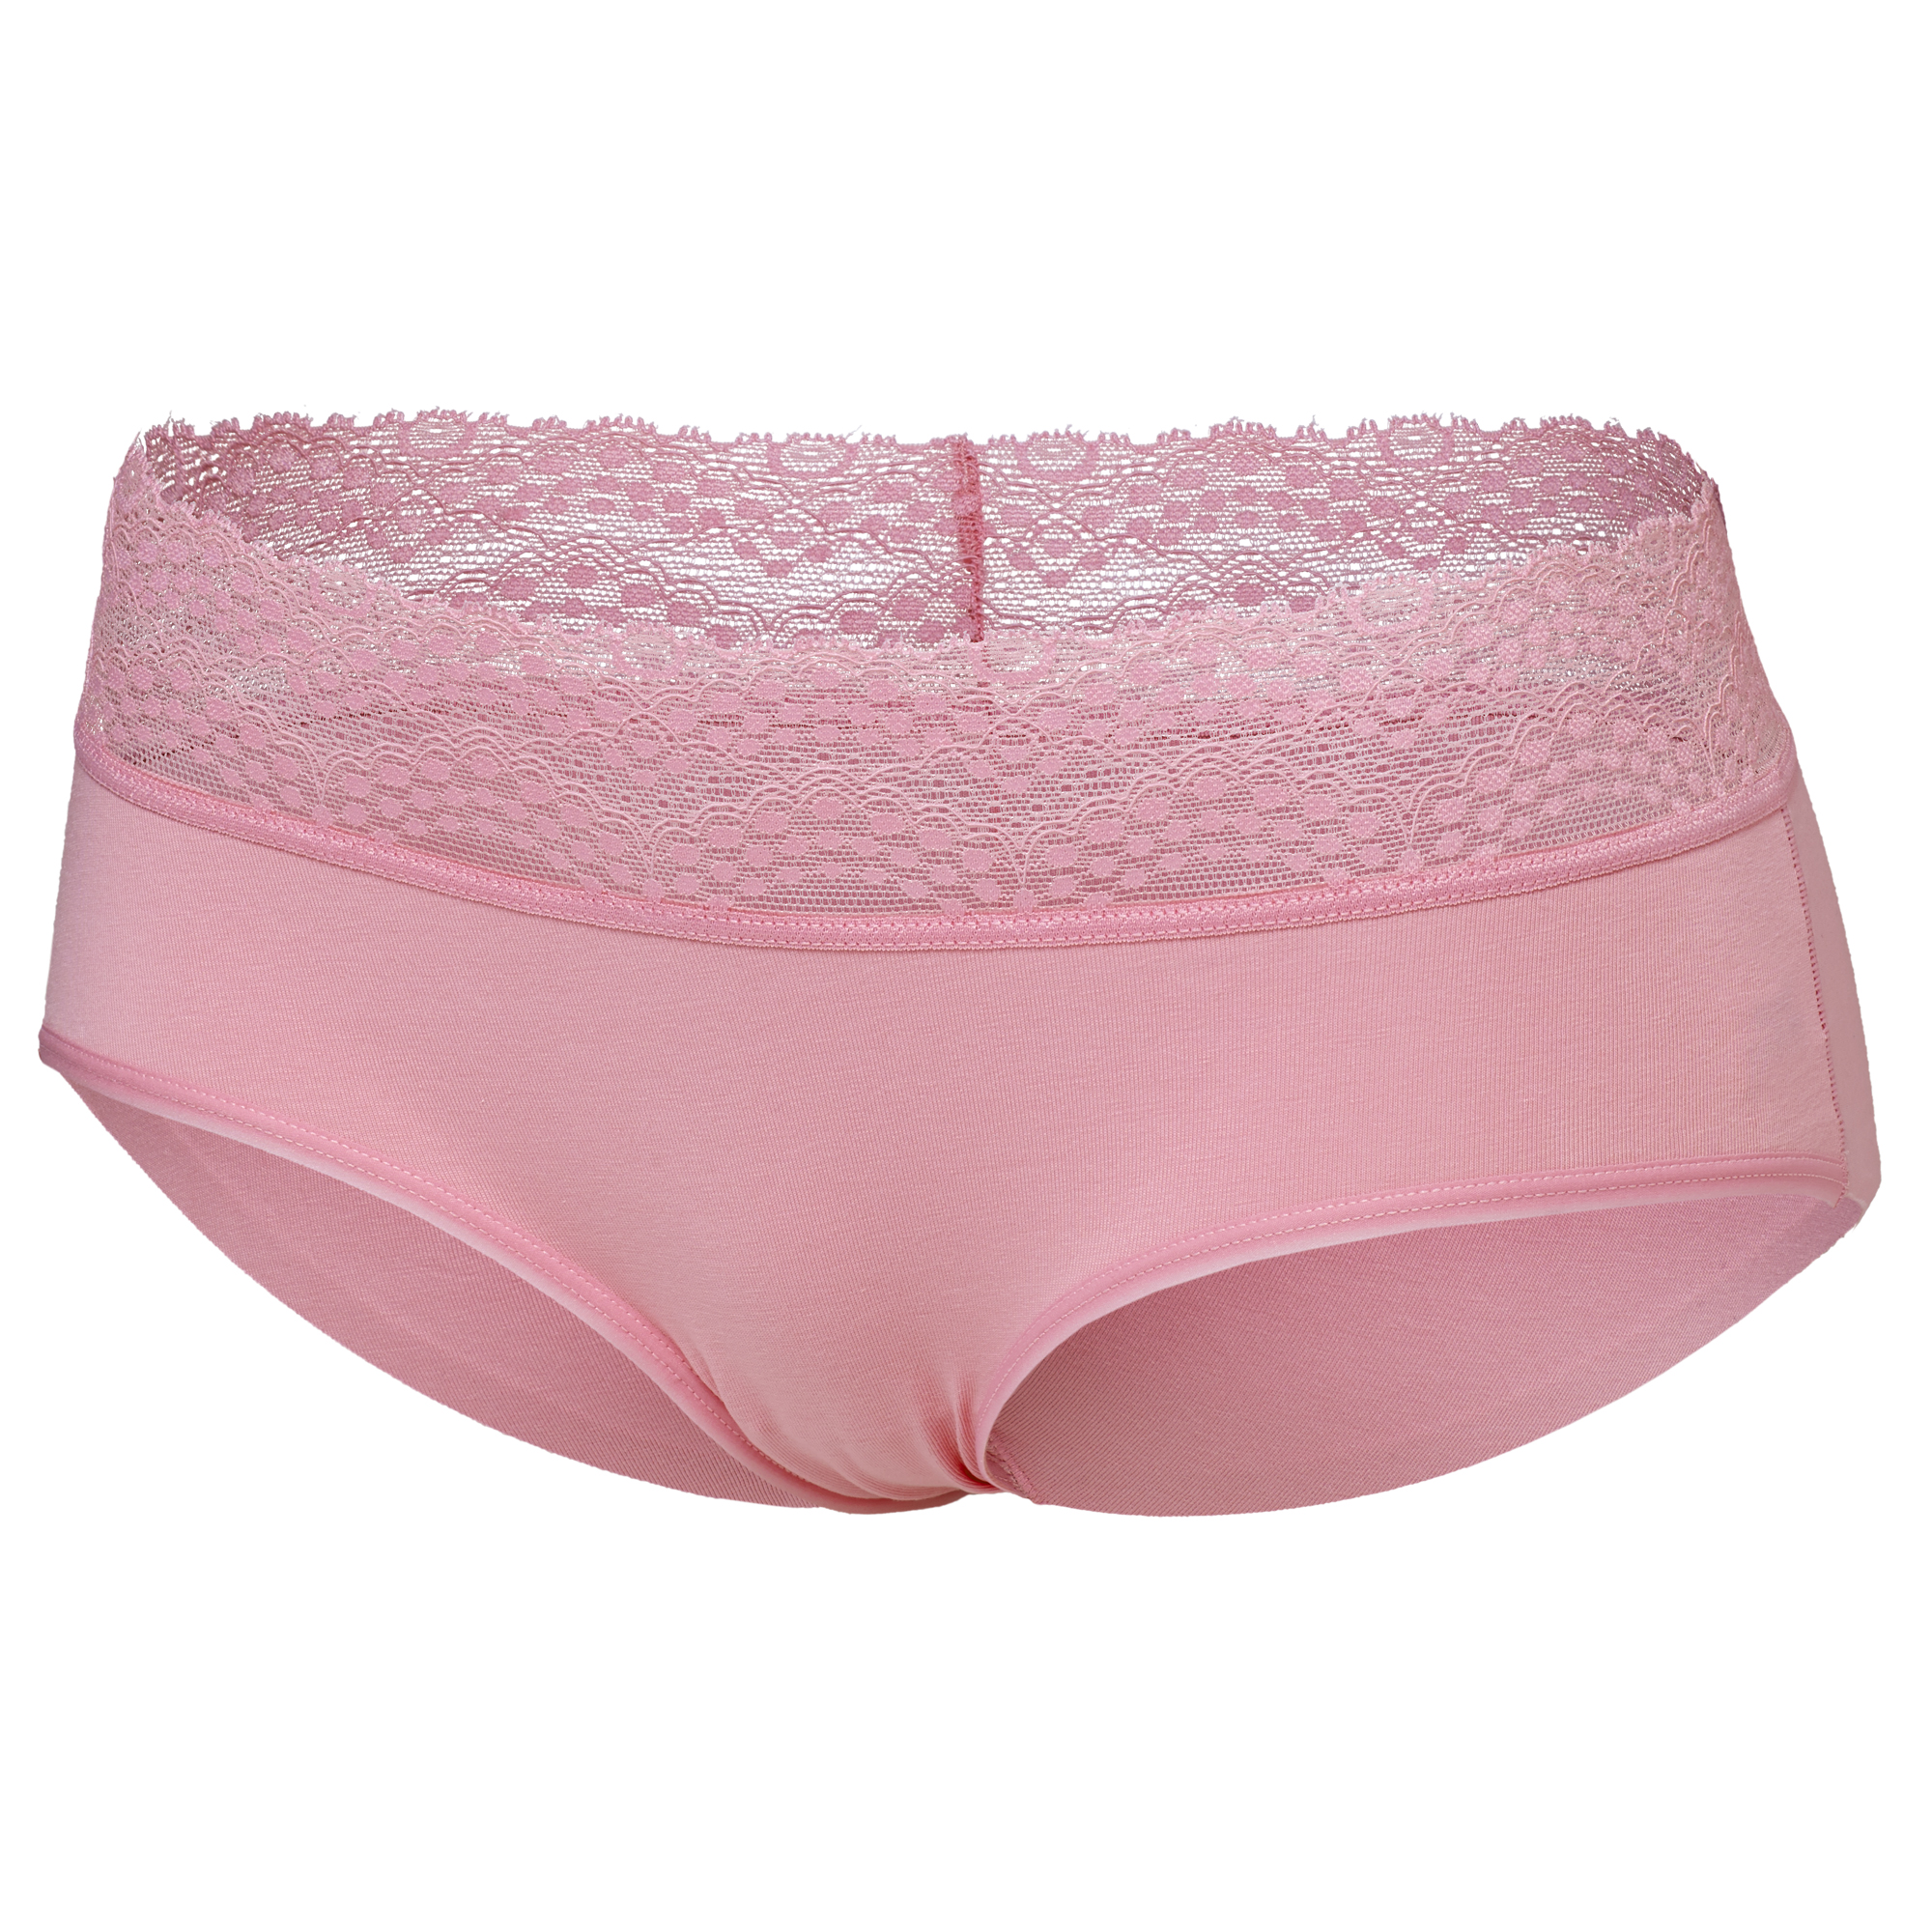 INV. COTTON HIPSTER LACE Baked Pink, baked pink (web), hi-res